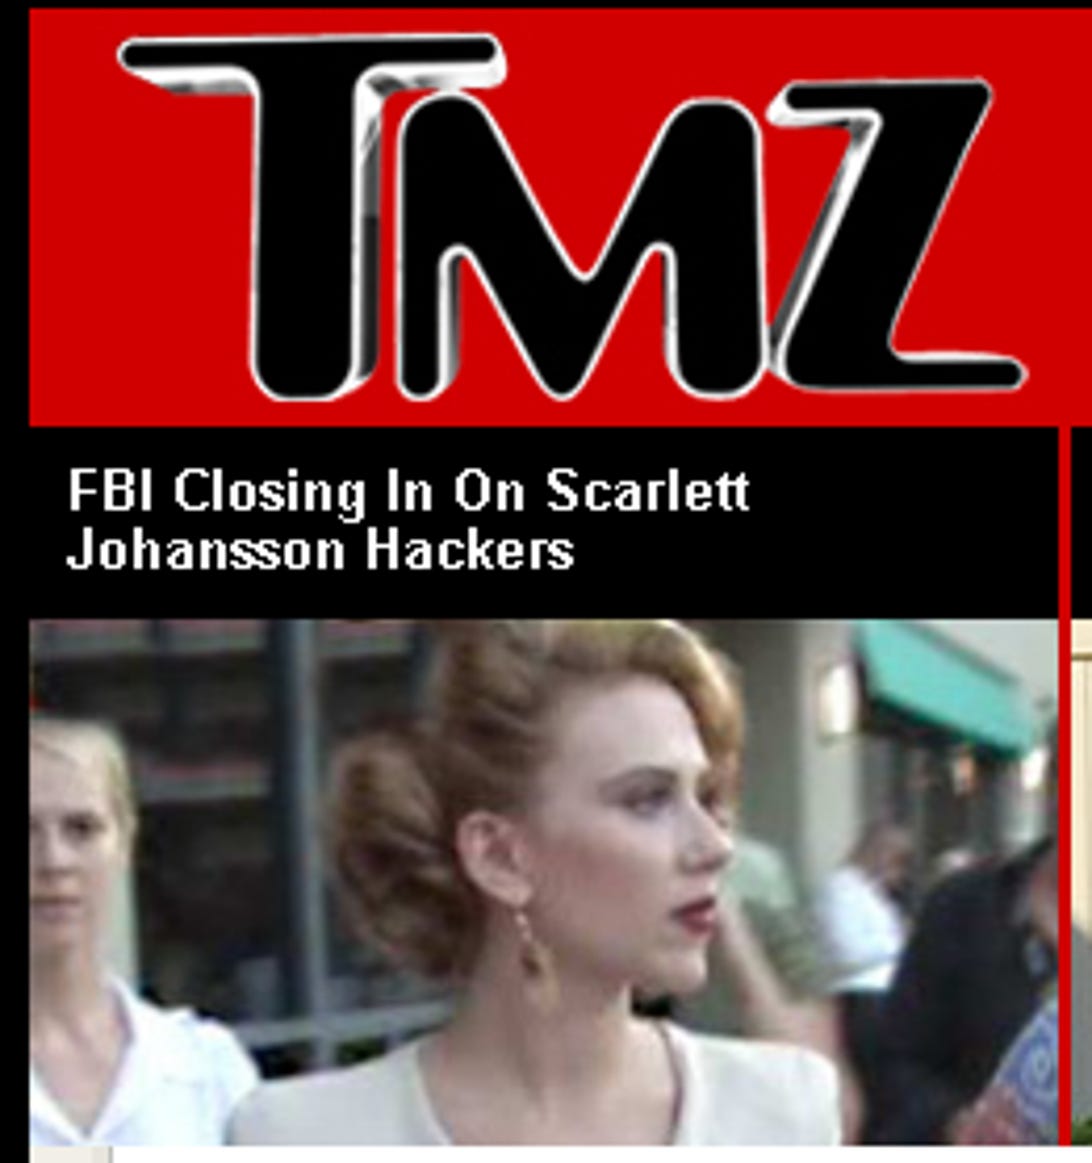 Scarlett Johansson is among the 50 or so alleged victims in an e-mail hacking case.